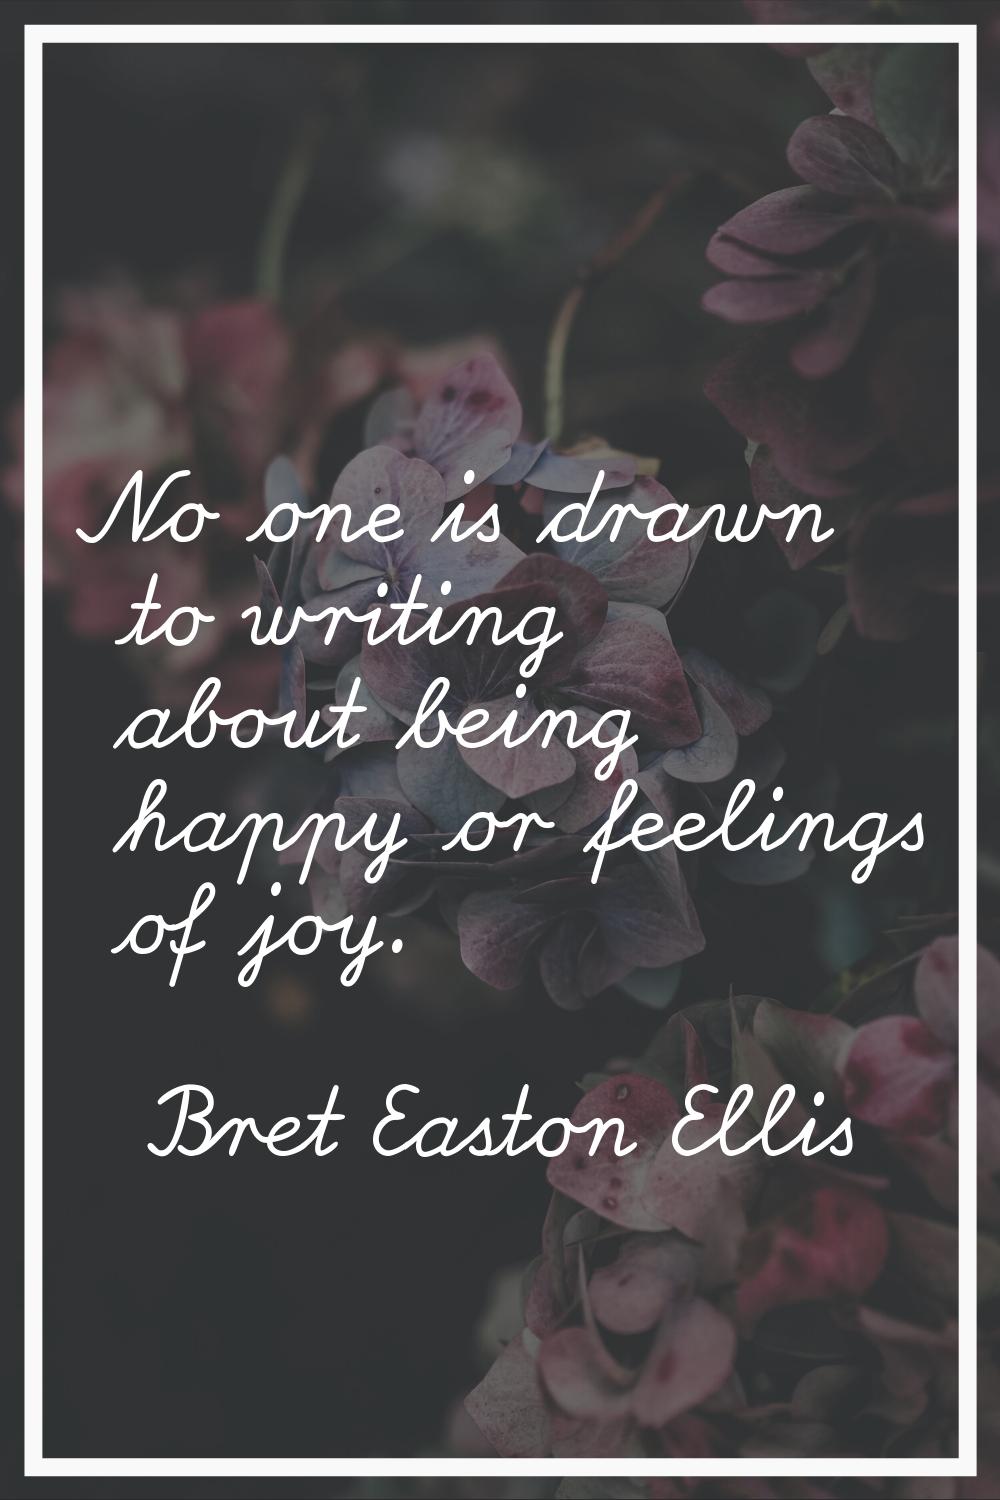 No one is drawn to writing about being happy or feelings of joy.